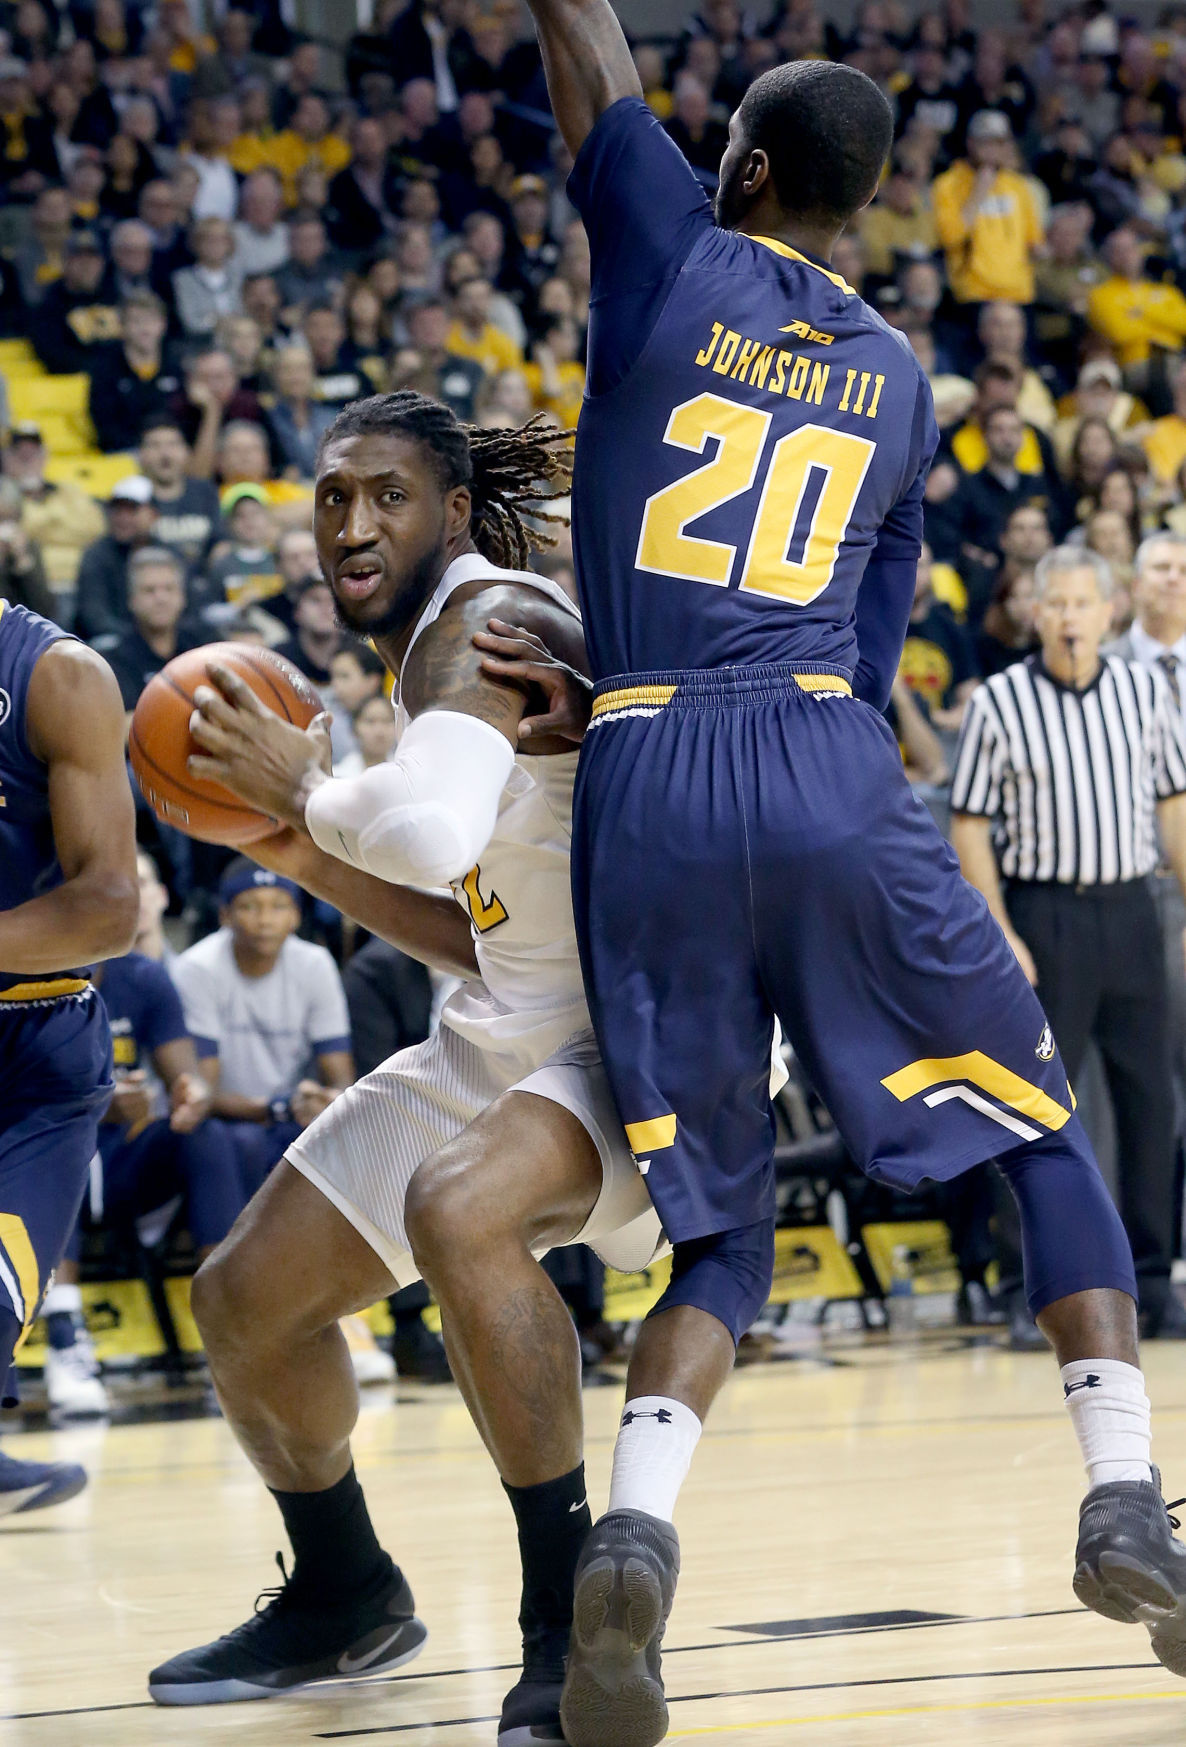 VCU basketball player Mo AlieCox will audition for NFL teams